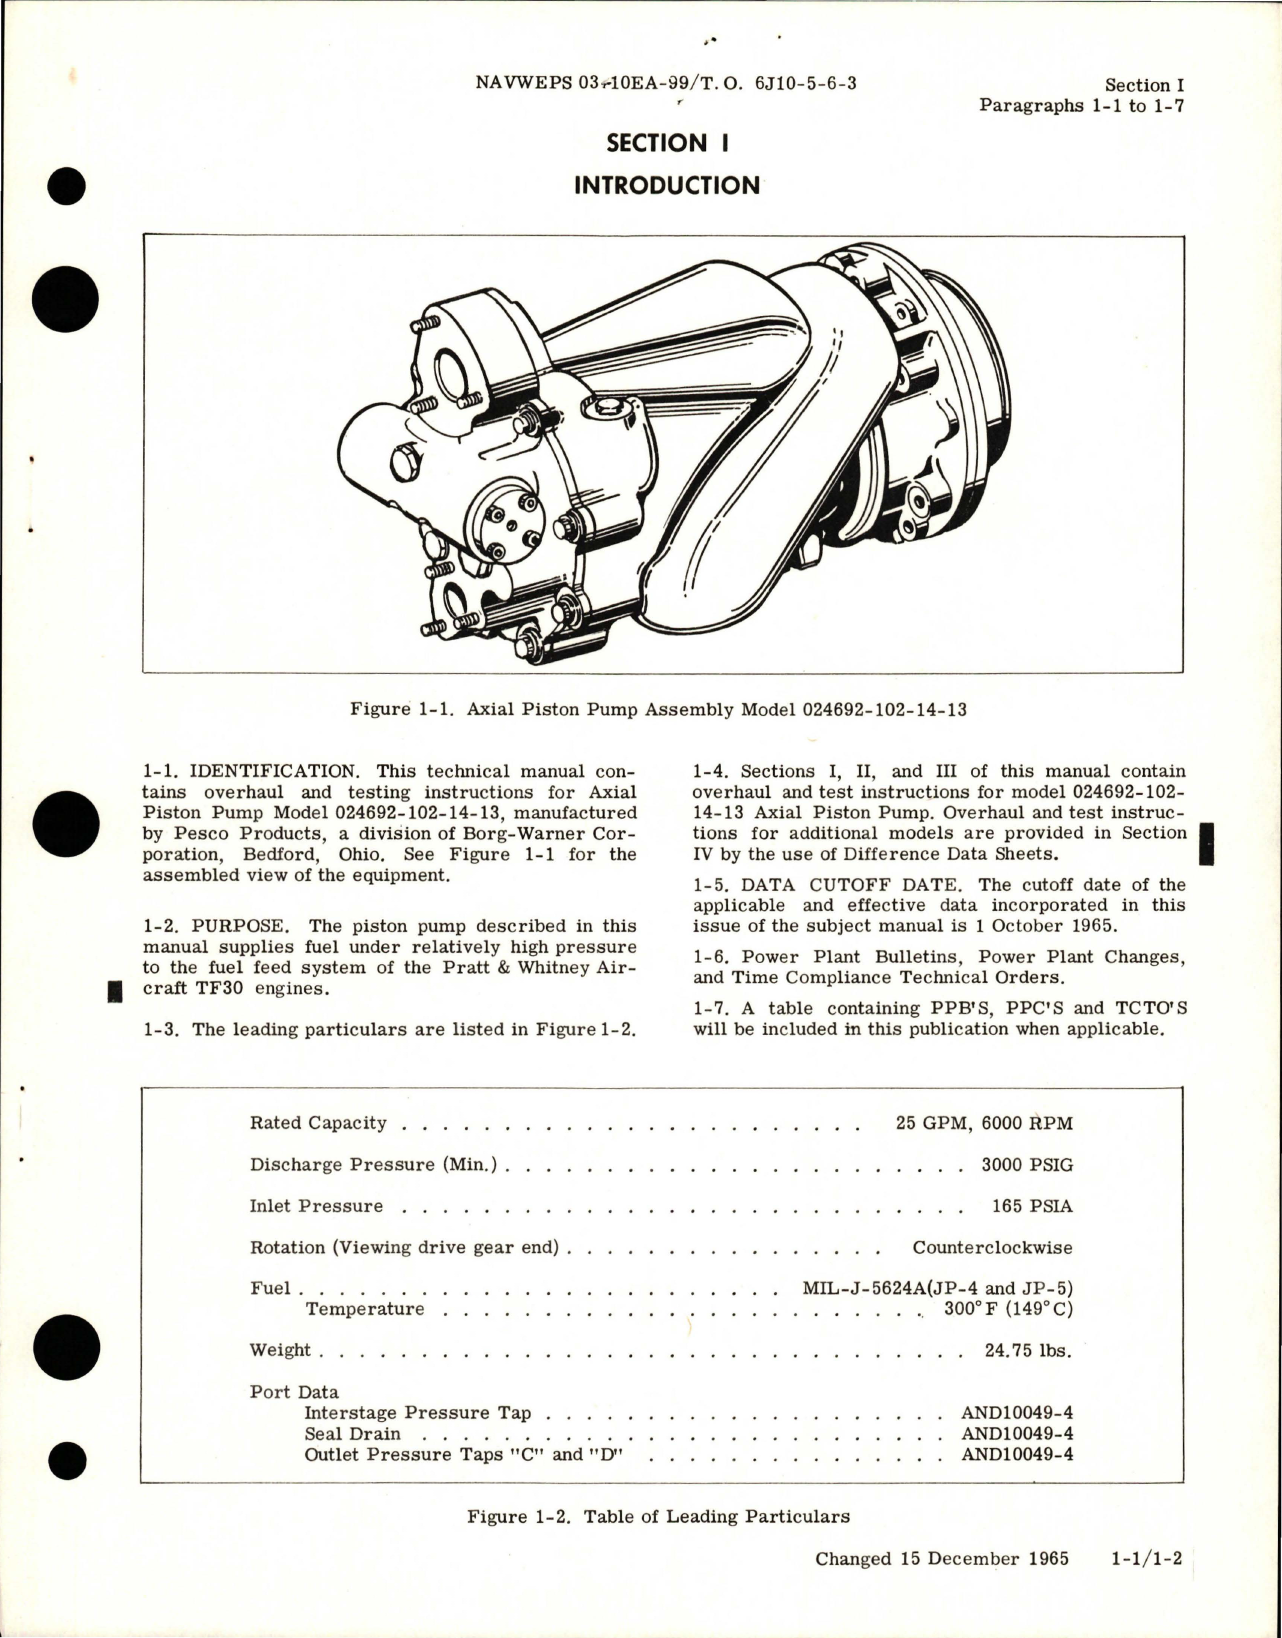 Sample page 5 from AirCorps Library document: Overhaul Instructions for Axial Piston Pump Assembly - 024693 Series